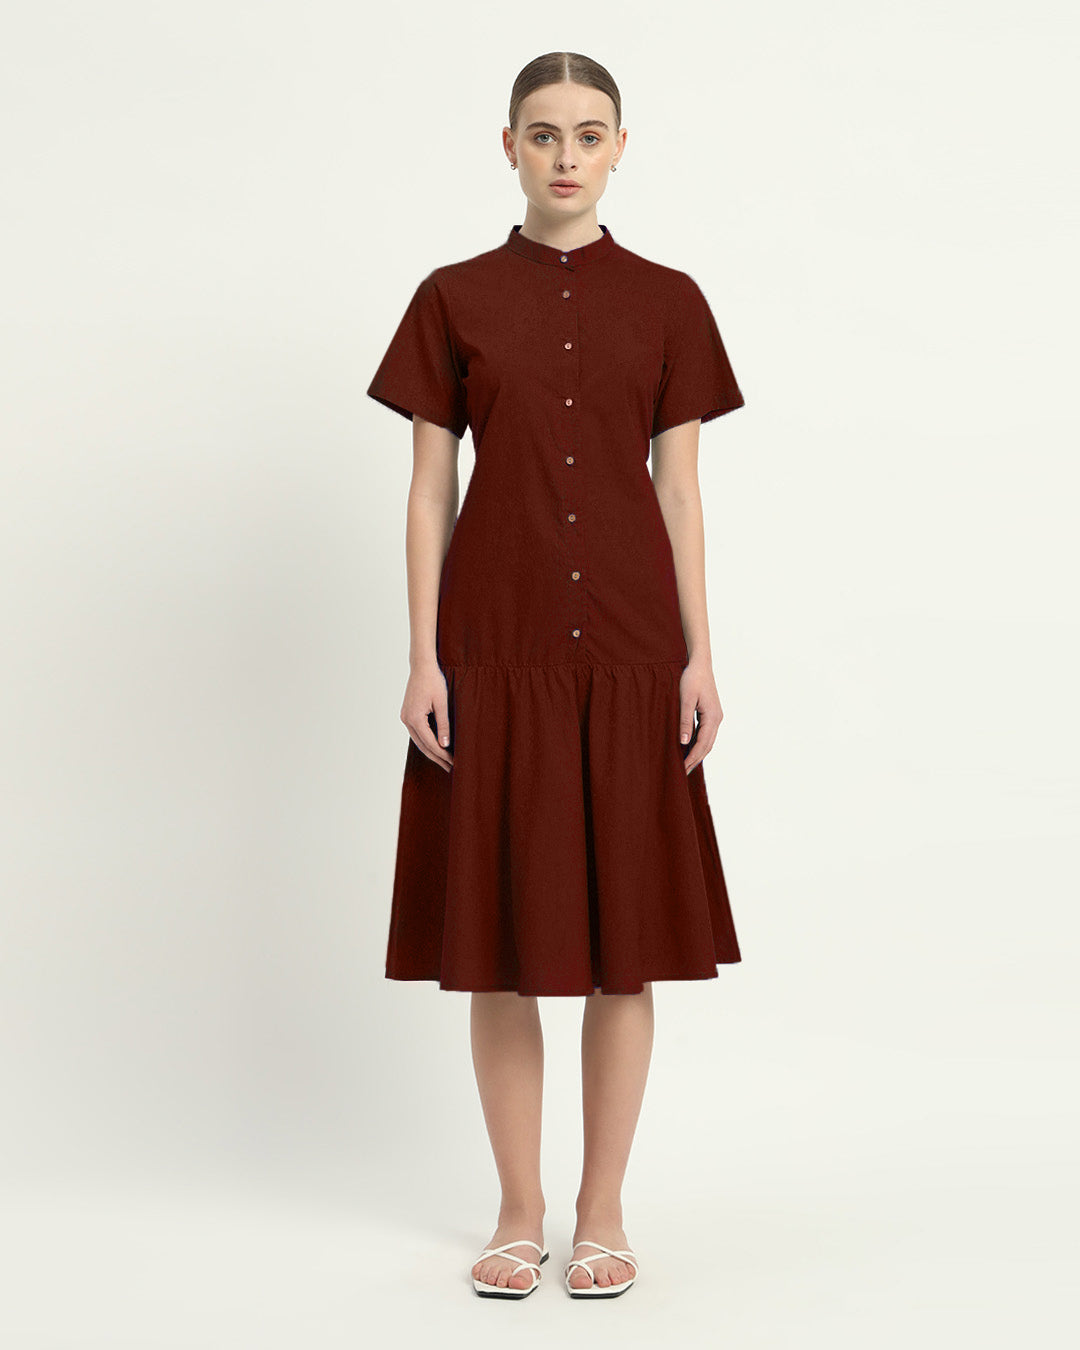 The Melrose Rouge Cotton Dress